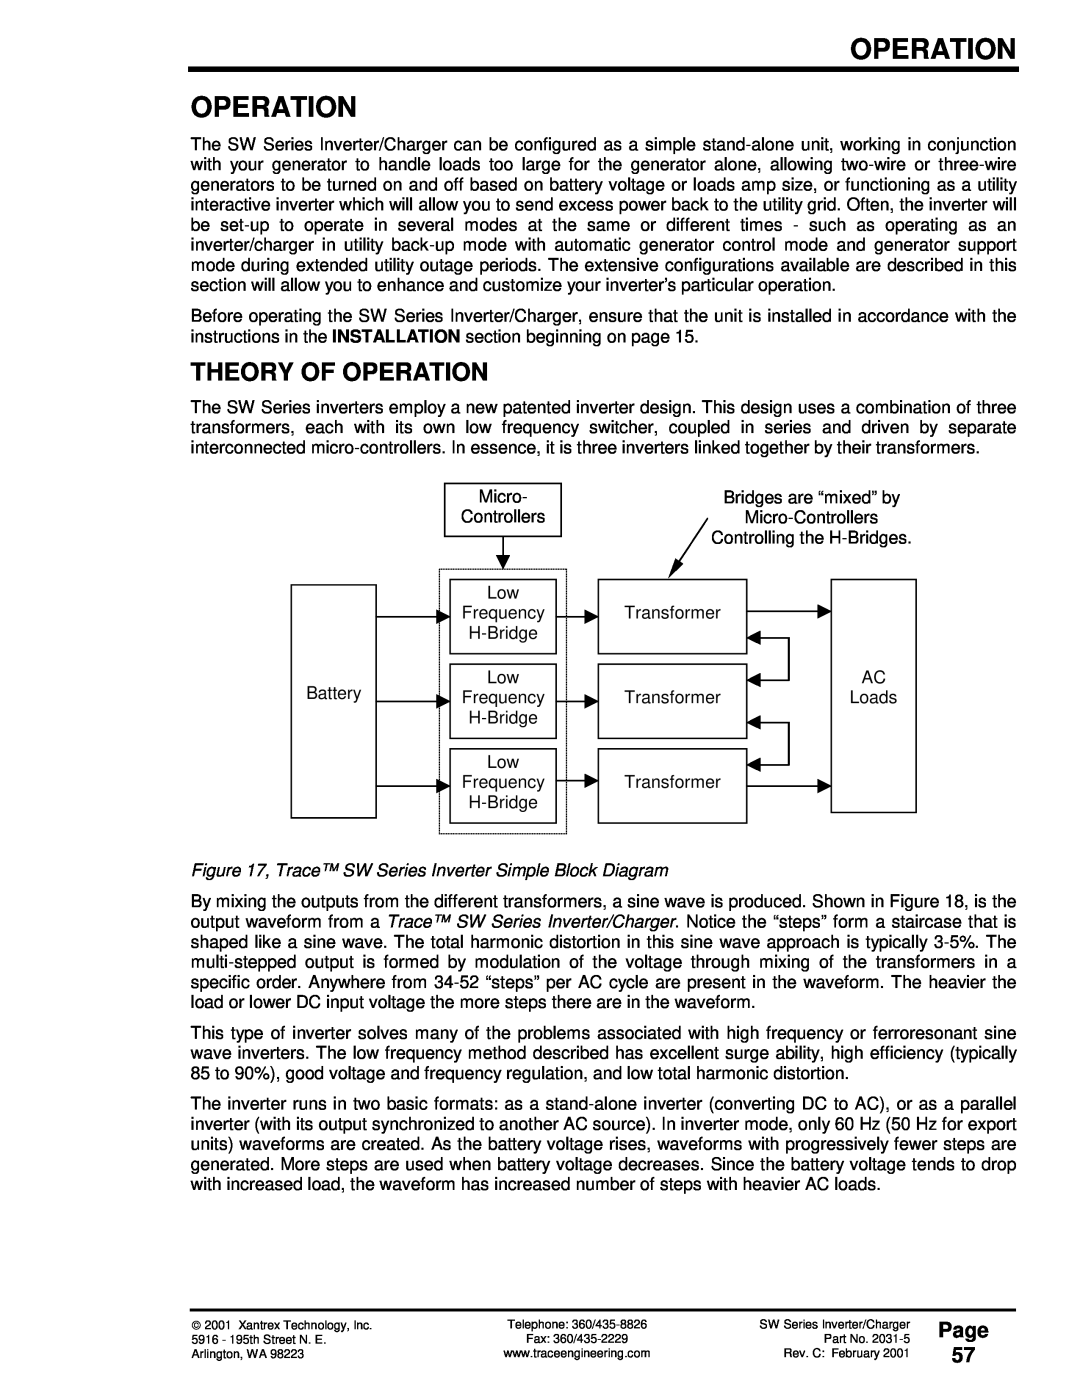 Xantrex Technology SW Series owner manual Operation Operation, Theory Of Operation, Page 57 